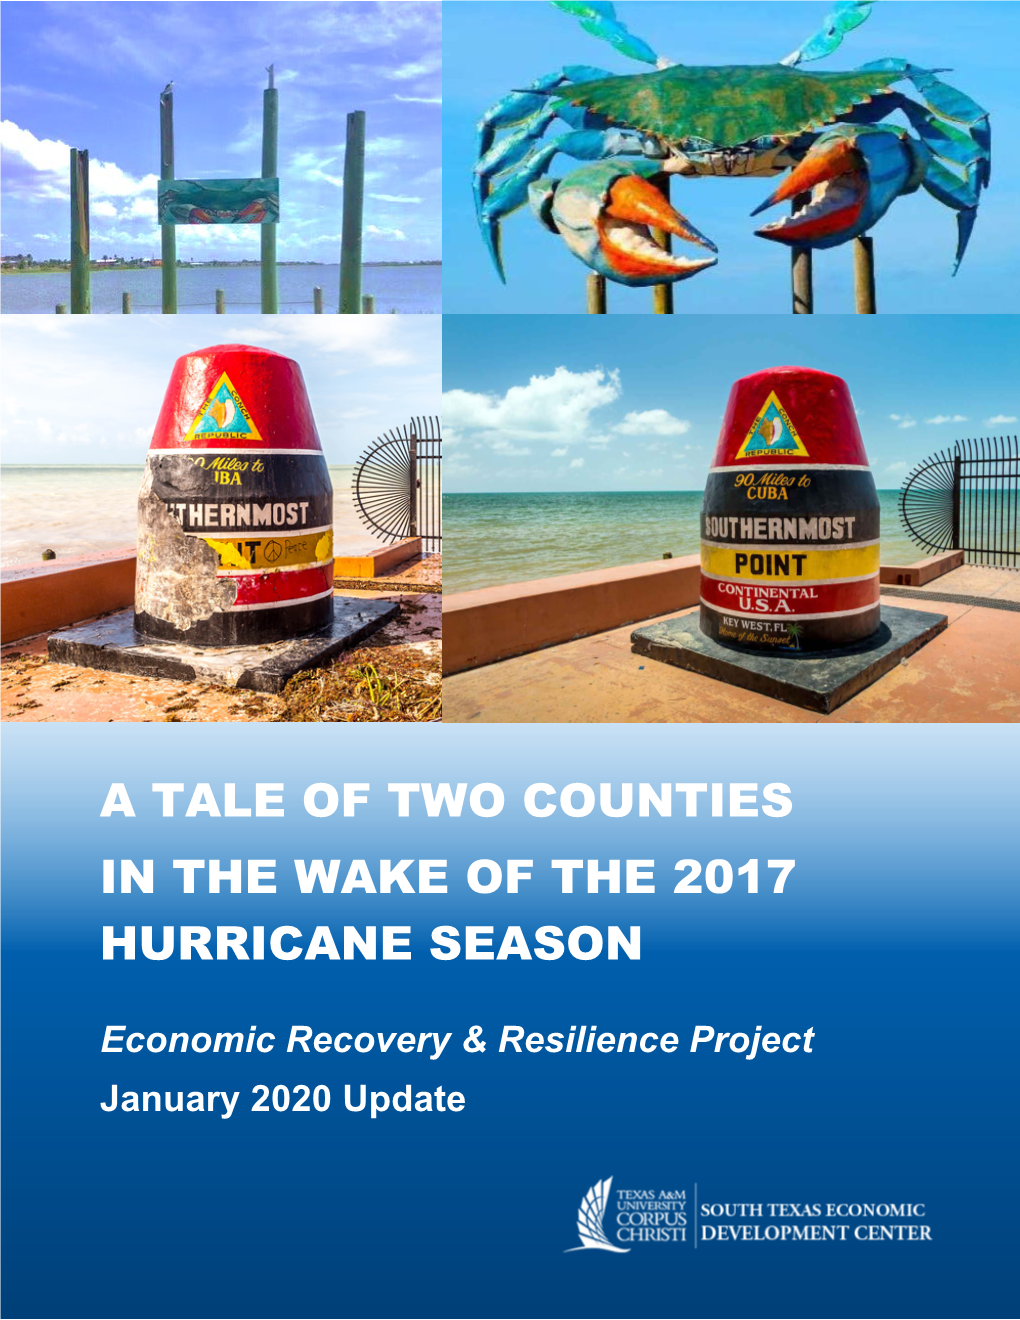 A Tale of Two Counties in the Wake of the 2017 Hurricane Season